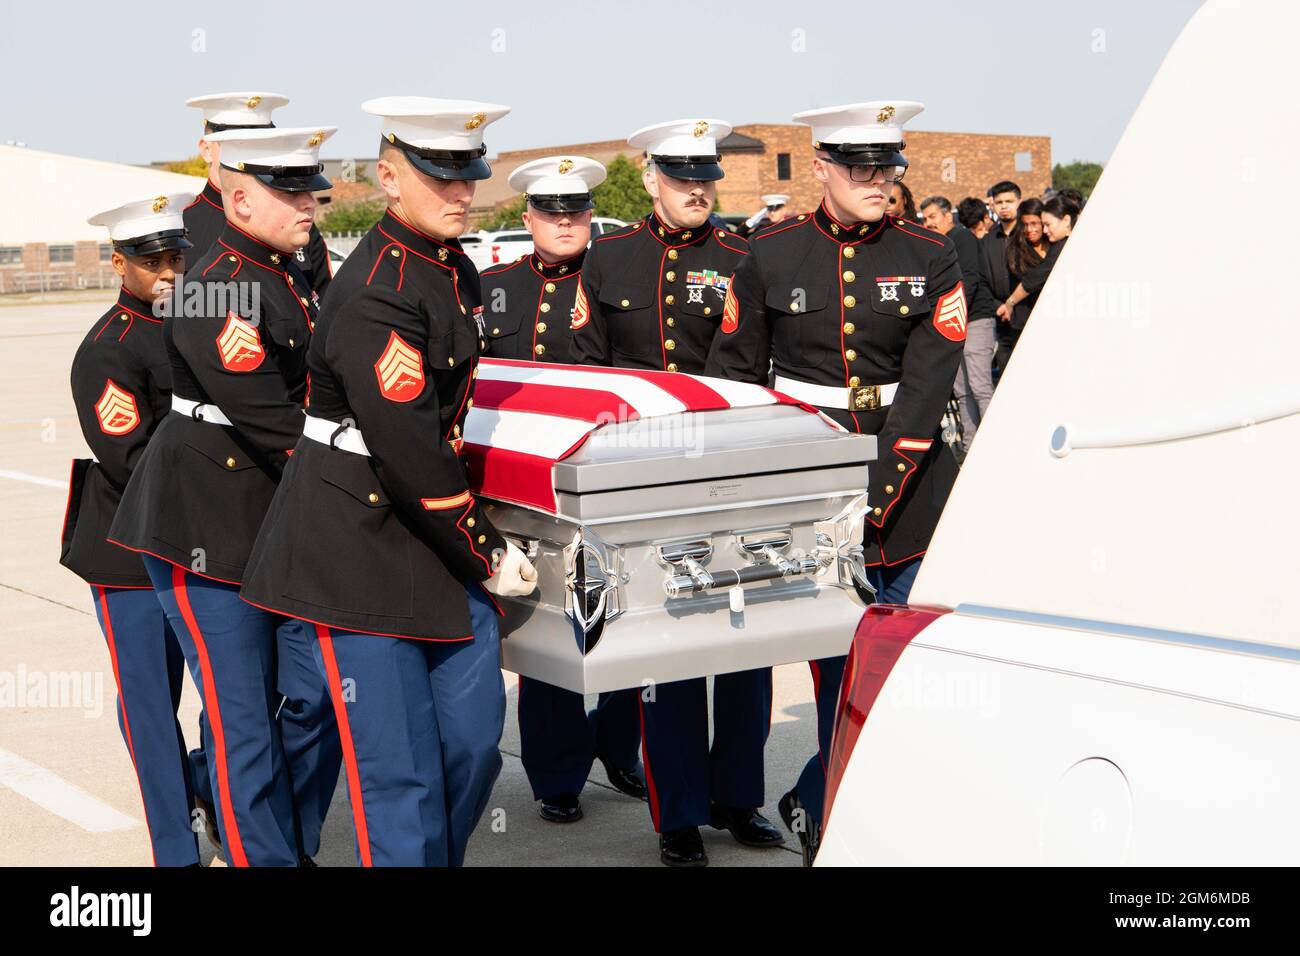 Marines from Detachment 1, Communications Company, Combat Logistics Regiment 45, 4th Marine Logistics Group, transfer the remains of U.S. Marine Corps Cpl. Humberto A. Sanchez of Logansport, Indiana, Sept. 12, 2021 at Grissom Air Reserve Base, Indiana. Sanchez was one of 13 U.S. service members killed Aug. 26, 2021, as the result of an enemy attack while supporting evacuation efforts for Operation Freedom’s Sentinel in Kabul, Afghanistan. (U.S. Air Force photo by Master Sgt. Benjamin Mota) Stock Photo